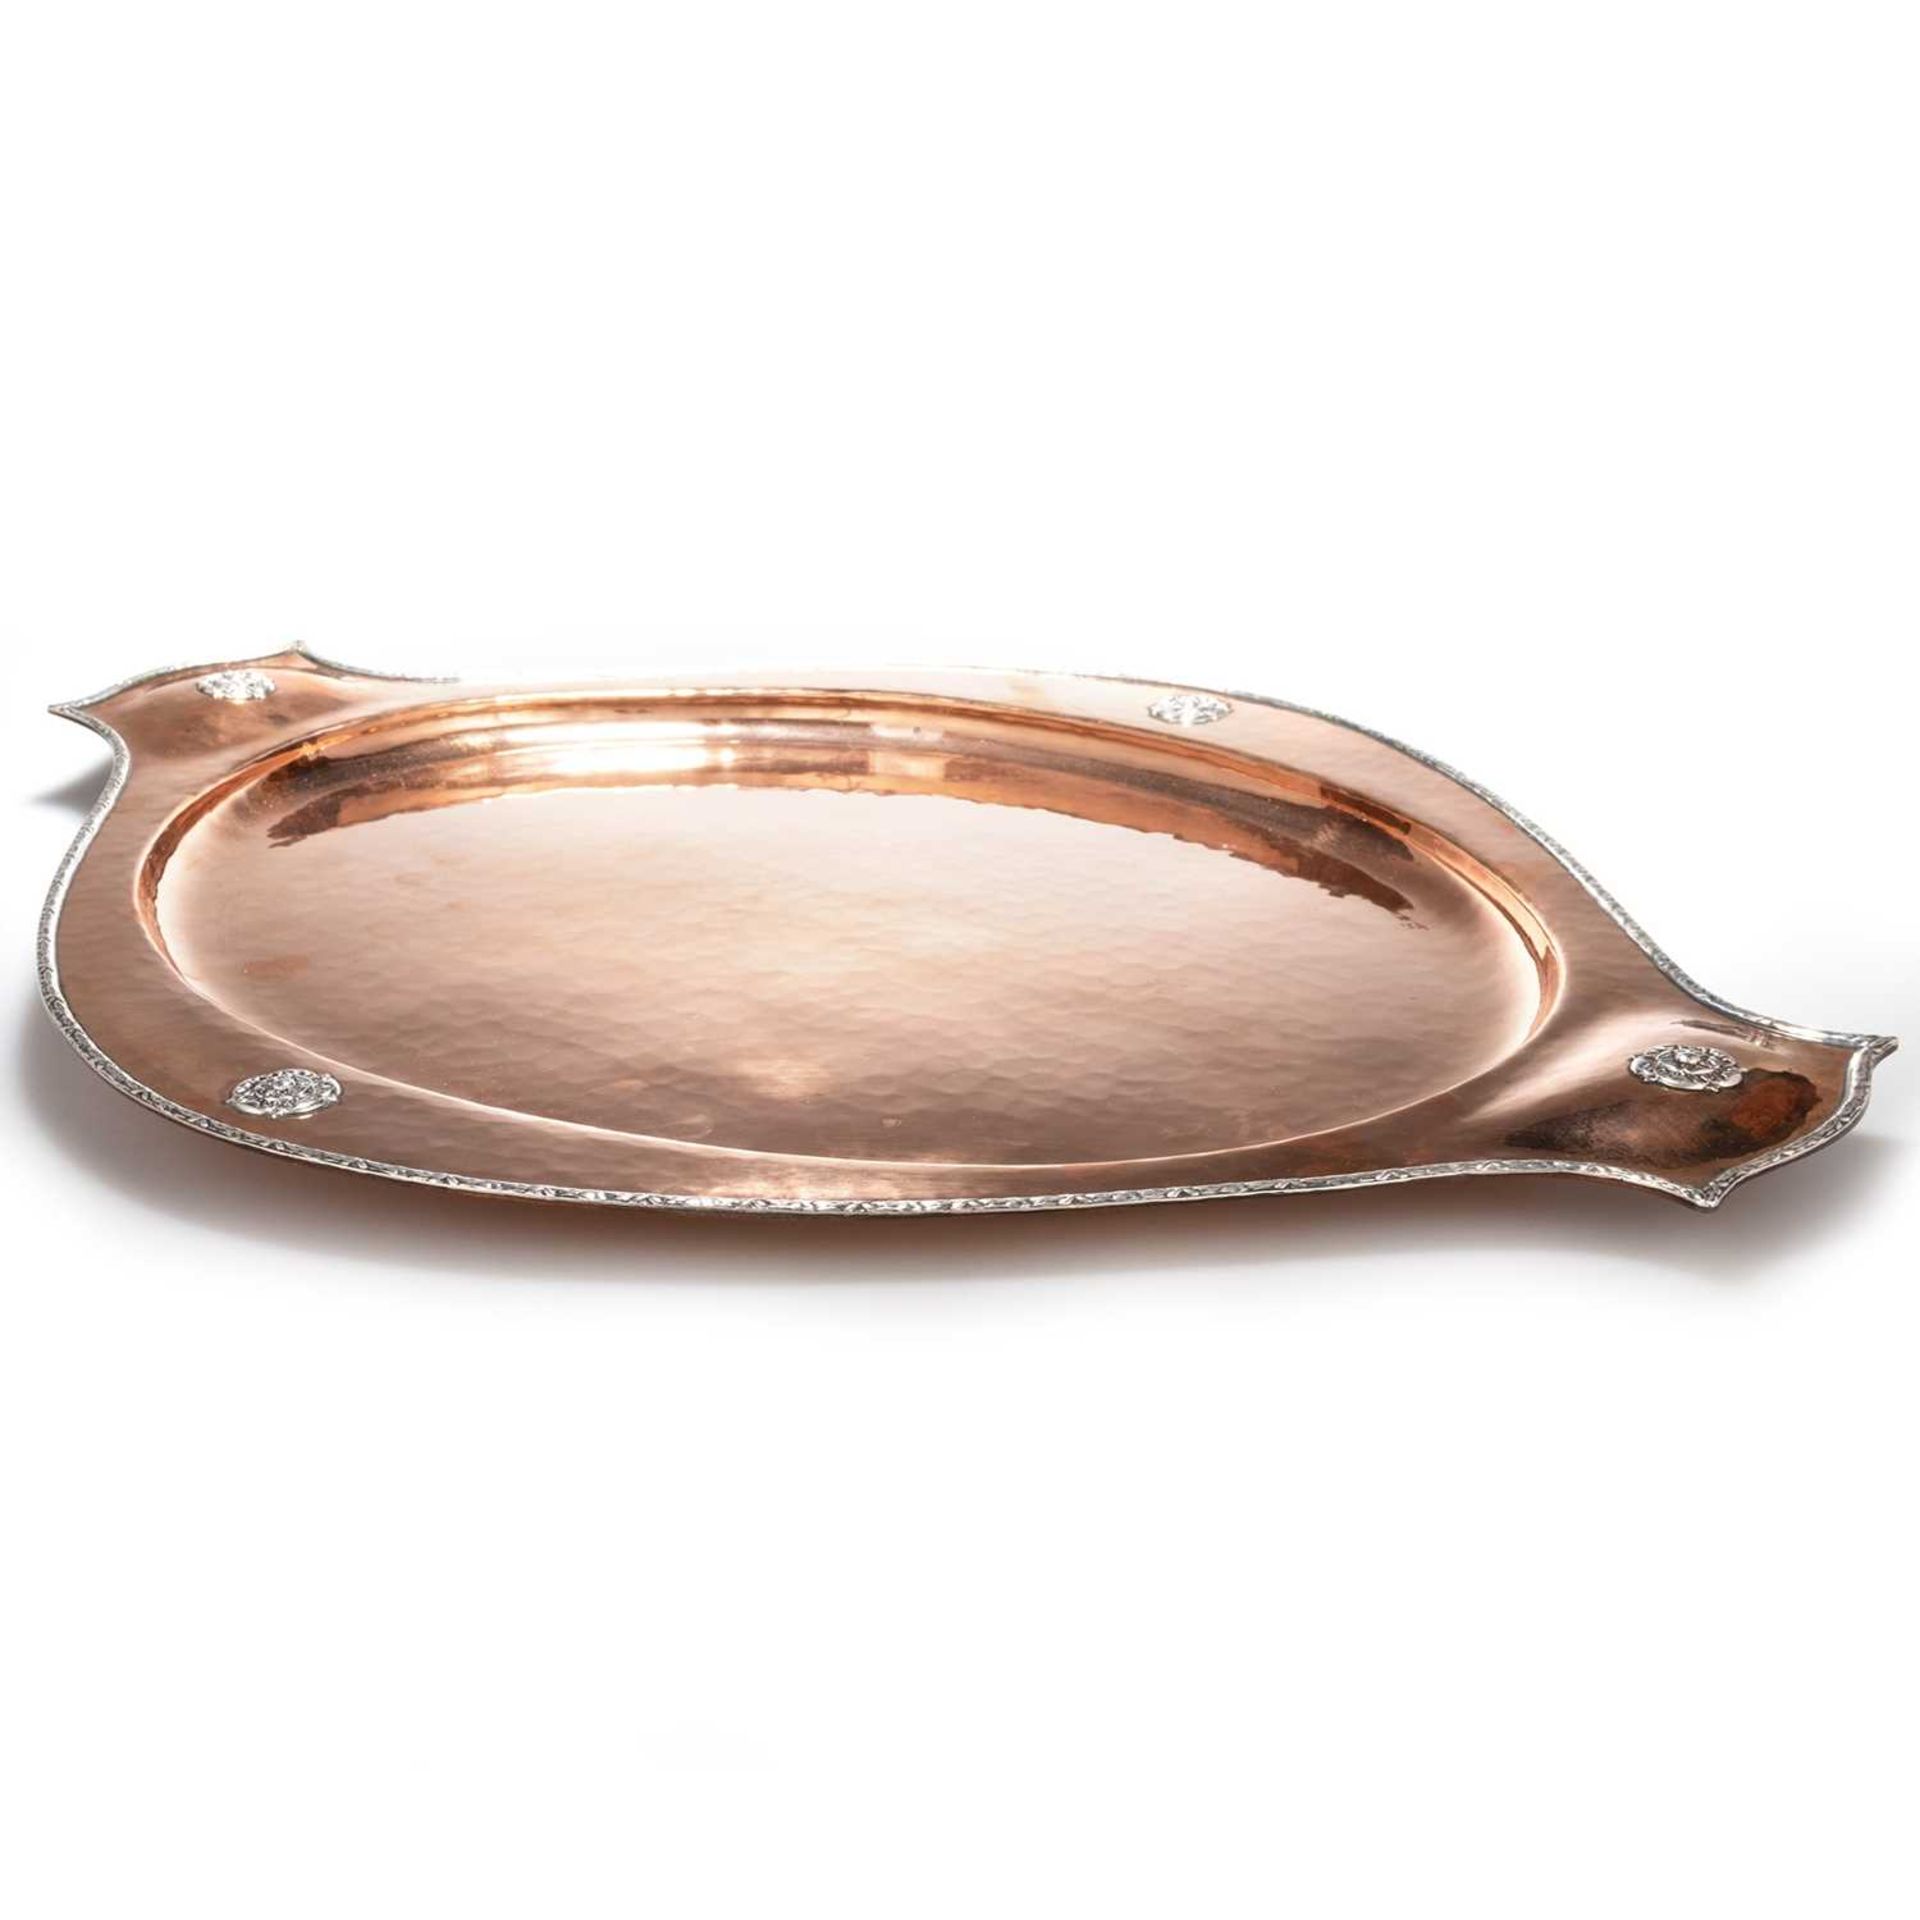 AN A.E. JONES ARTS AND CRAFTS COPPER TRAY - Image 2 of 3